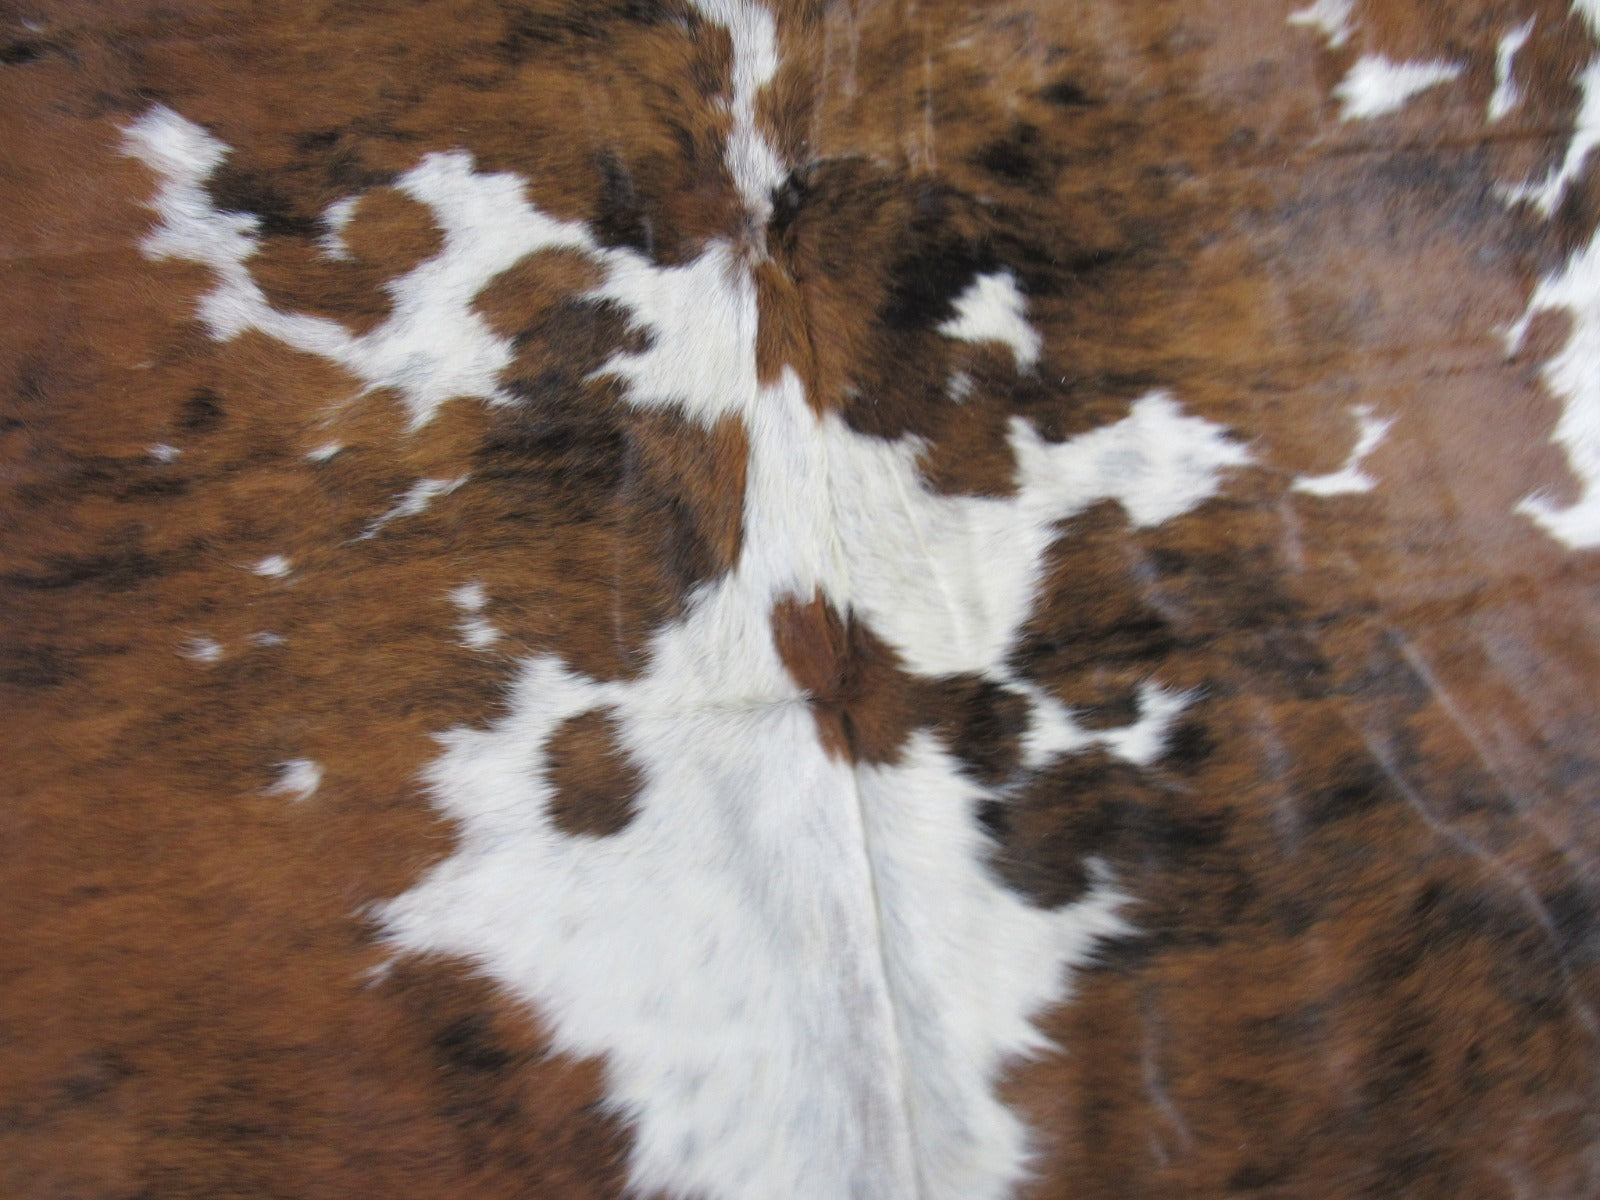 Lighter Tone Tricolor Speckled Cowhide Rug - Size: 7.2x7 feet C-1735